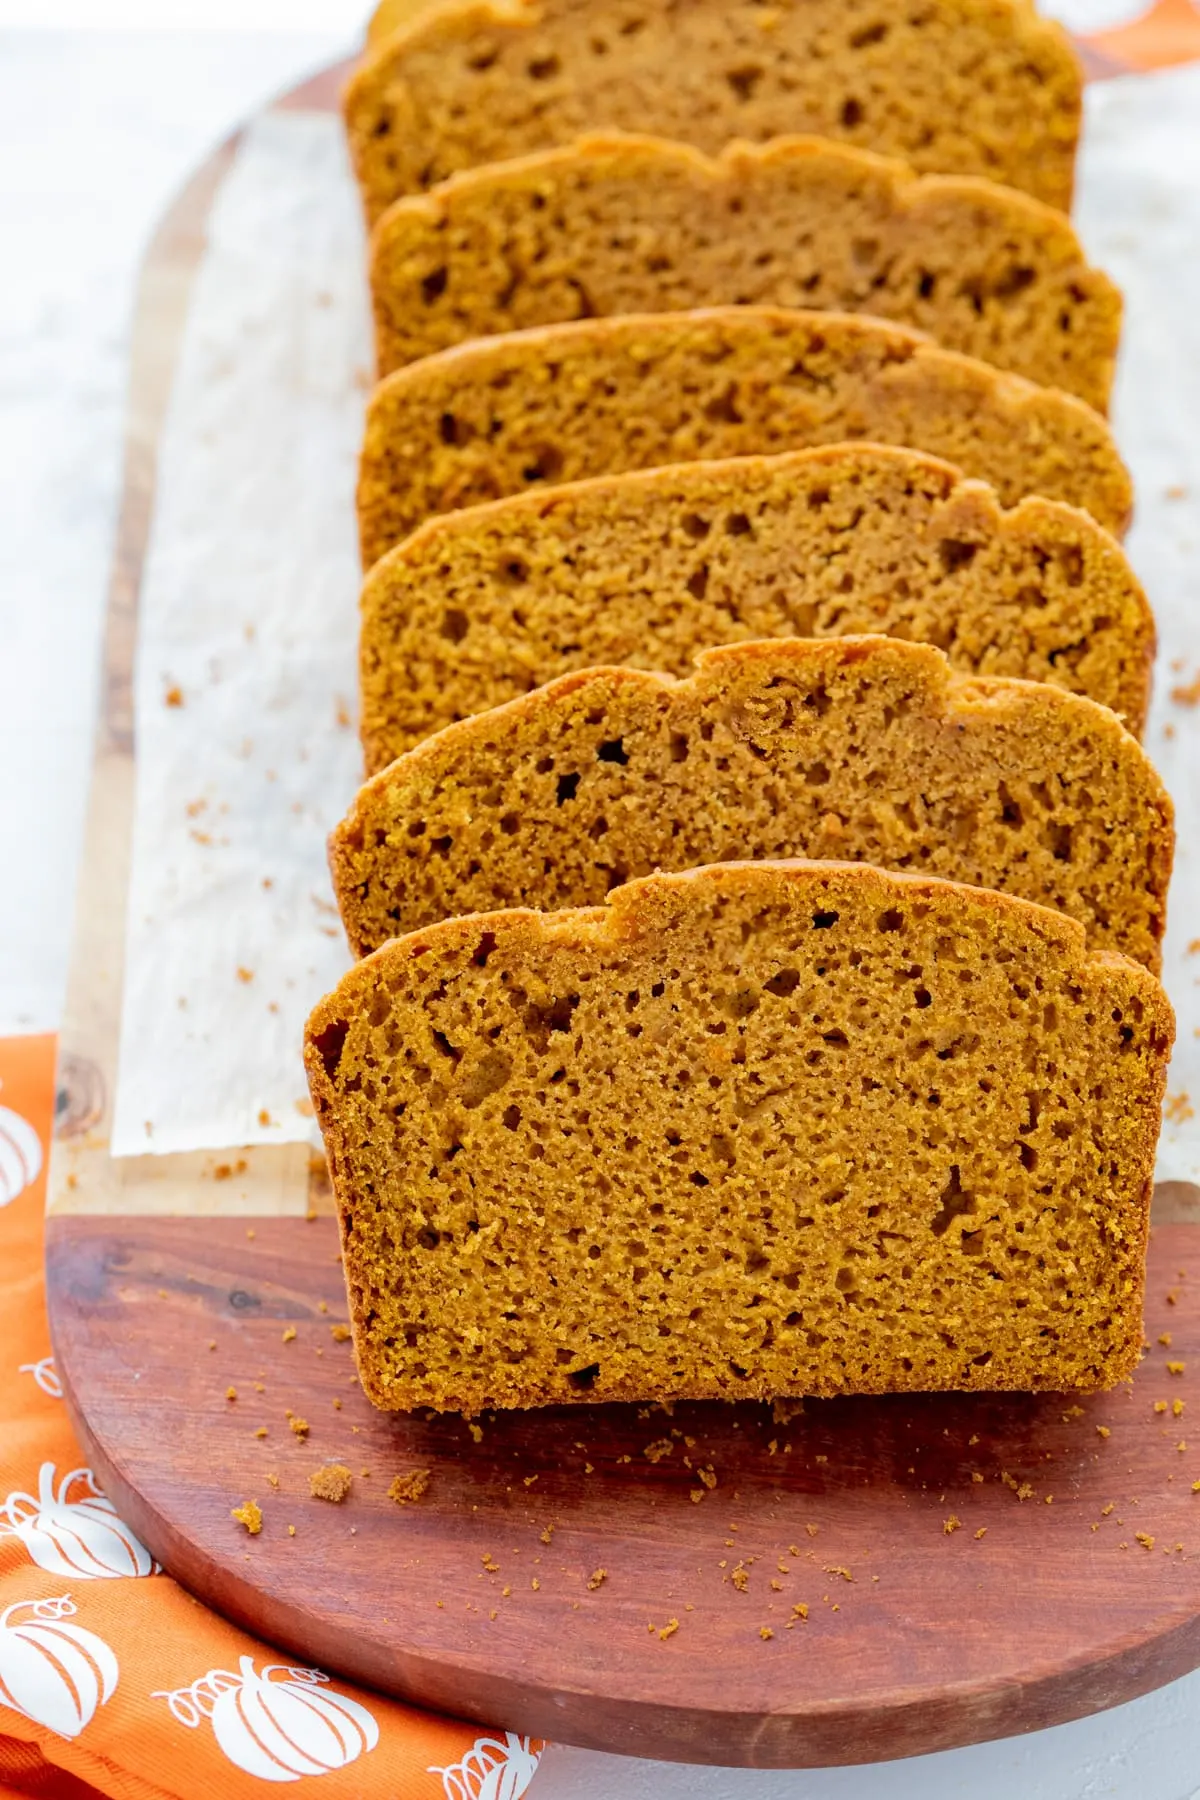 Slices of pumpkin bread on white parchment and wooden cutting board